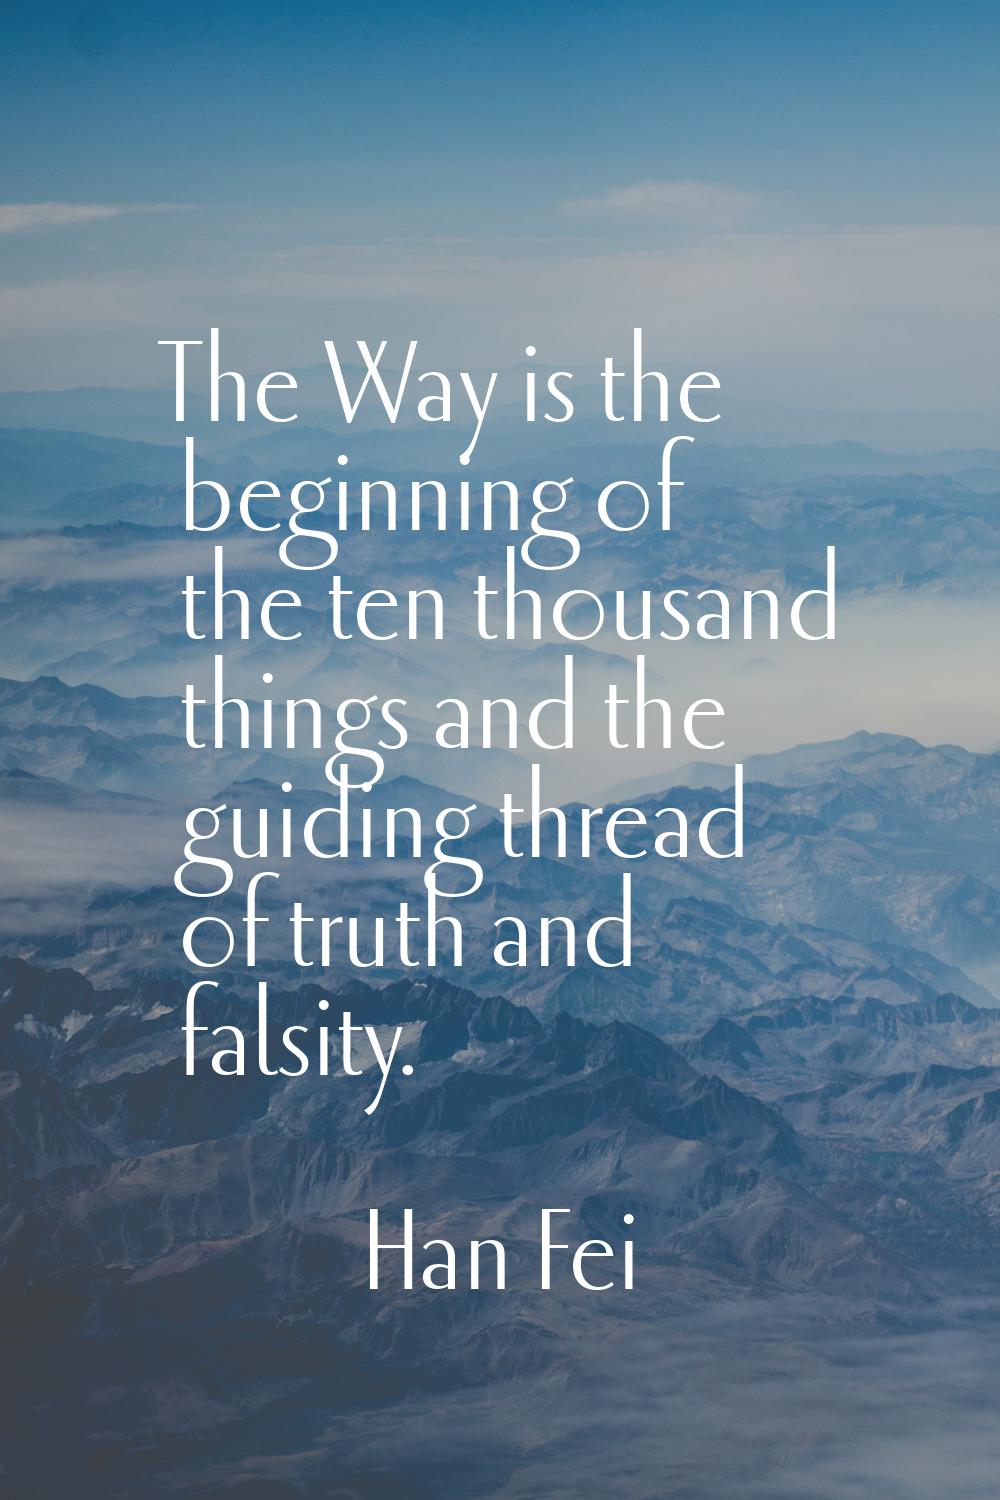 The Way is the beginning of the ten thousand things and the guiding thread of truth and falsity.